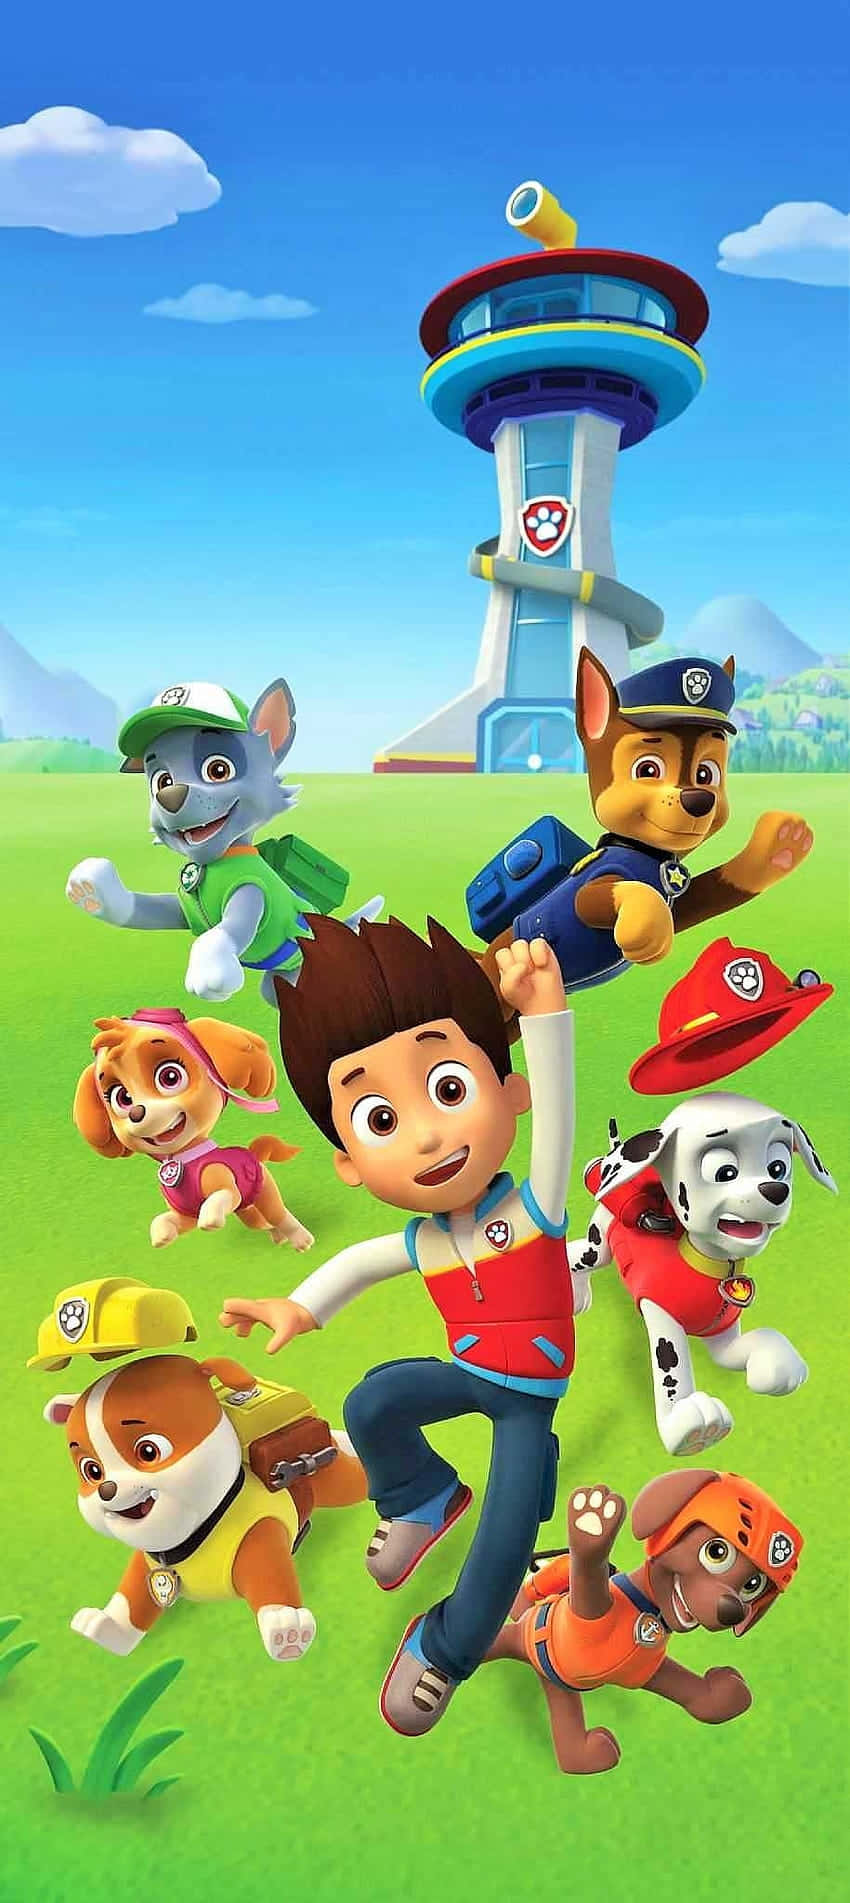 Caption: Join The Adventure With Paw Patrol